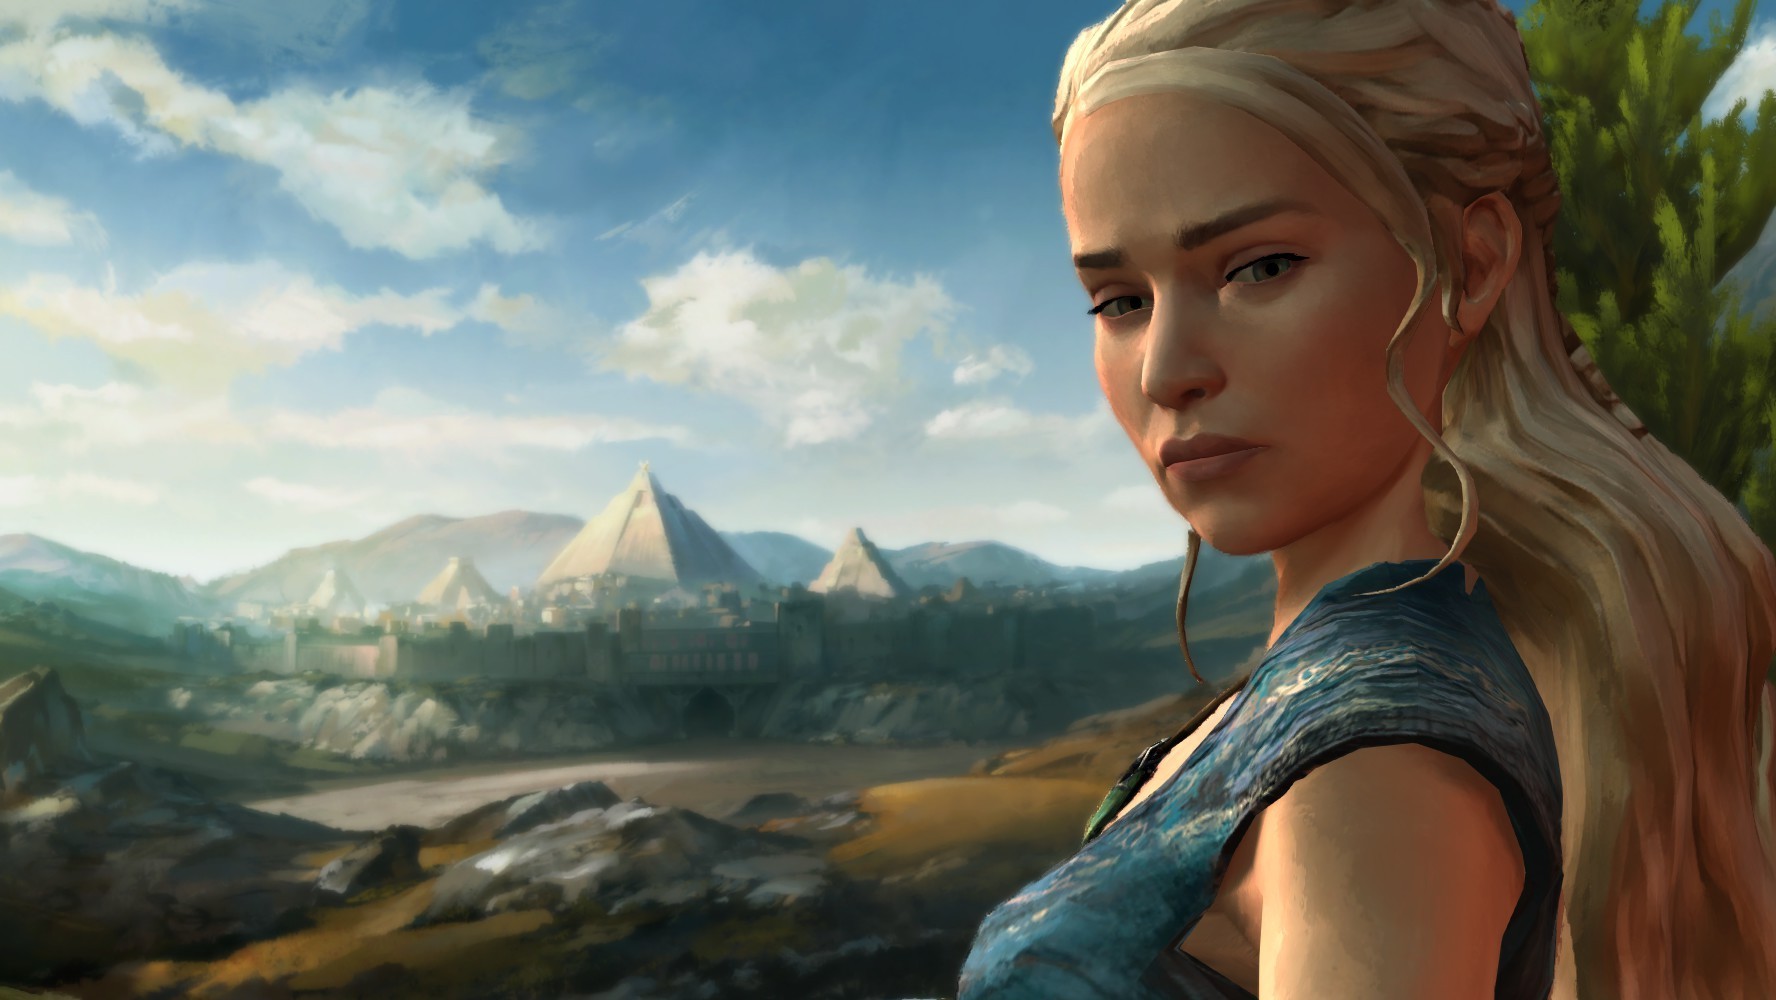 Game Of Thrones: A Telltale Games Series, Game Of Thrones Wallpaper